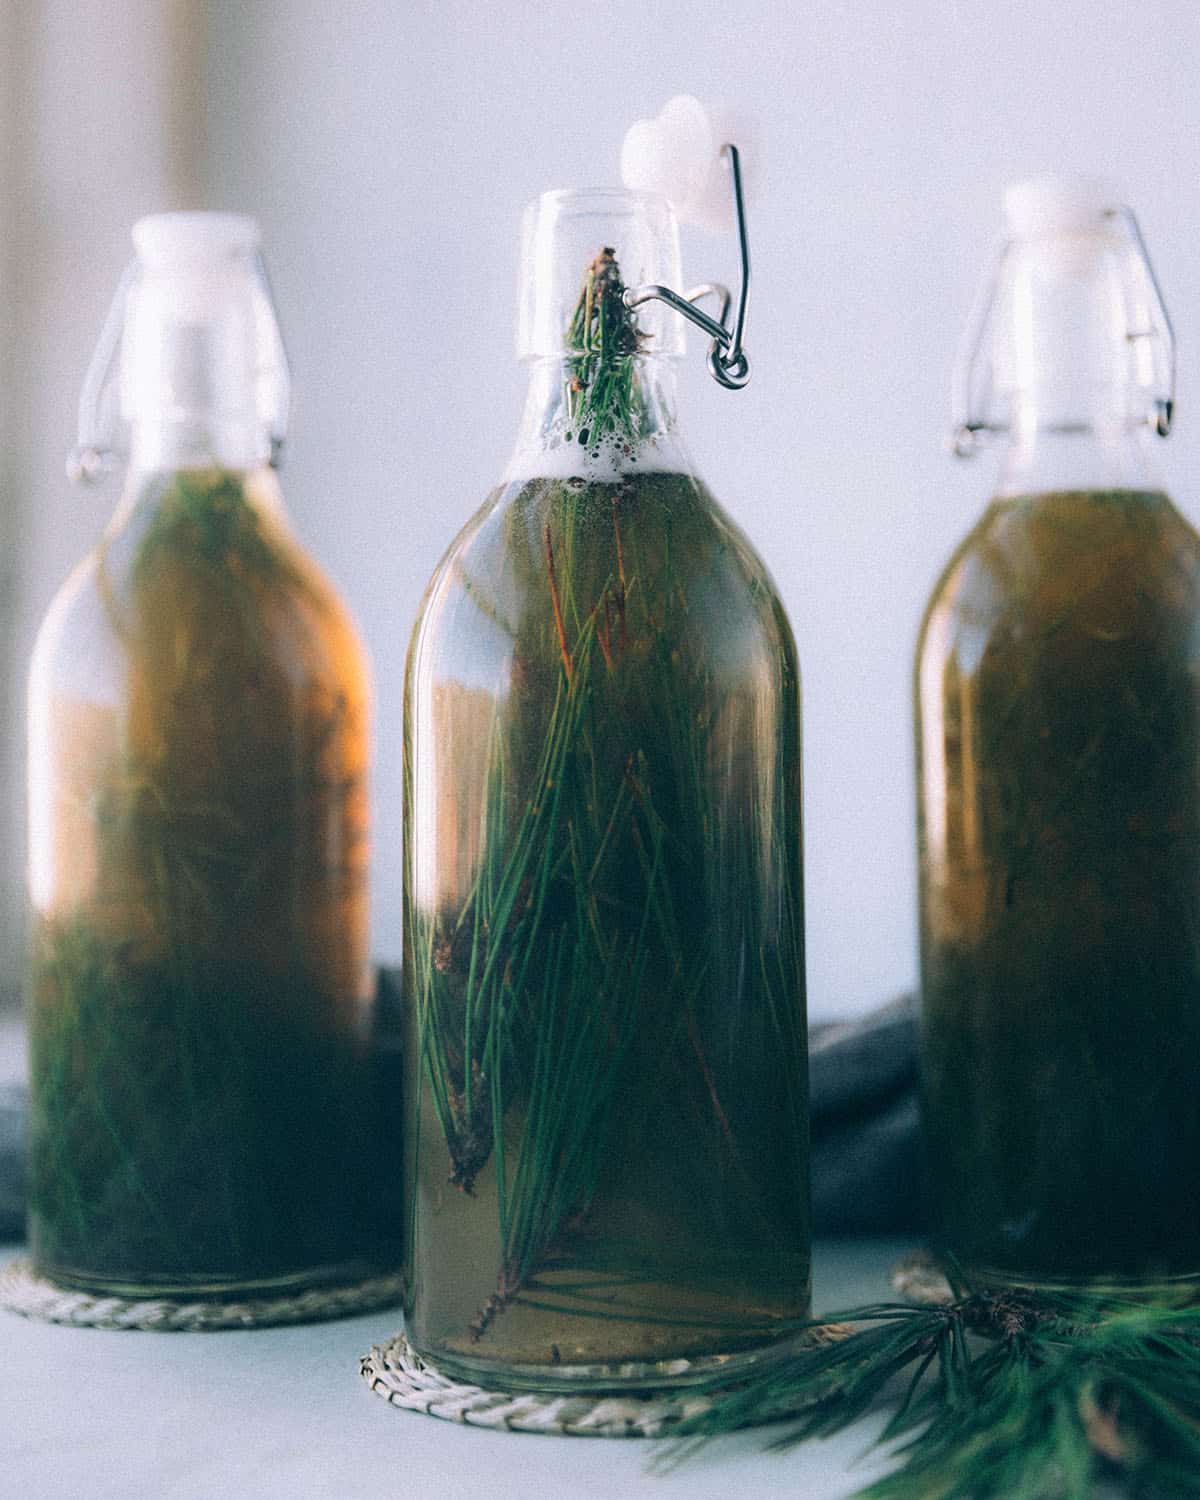 3 bottles of fermented pine needle soda with the needles still in them, on a white surface surrounded by pine needles.